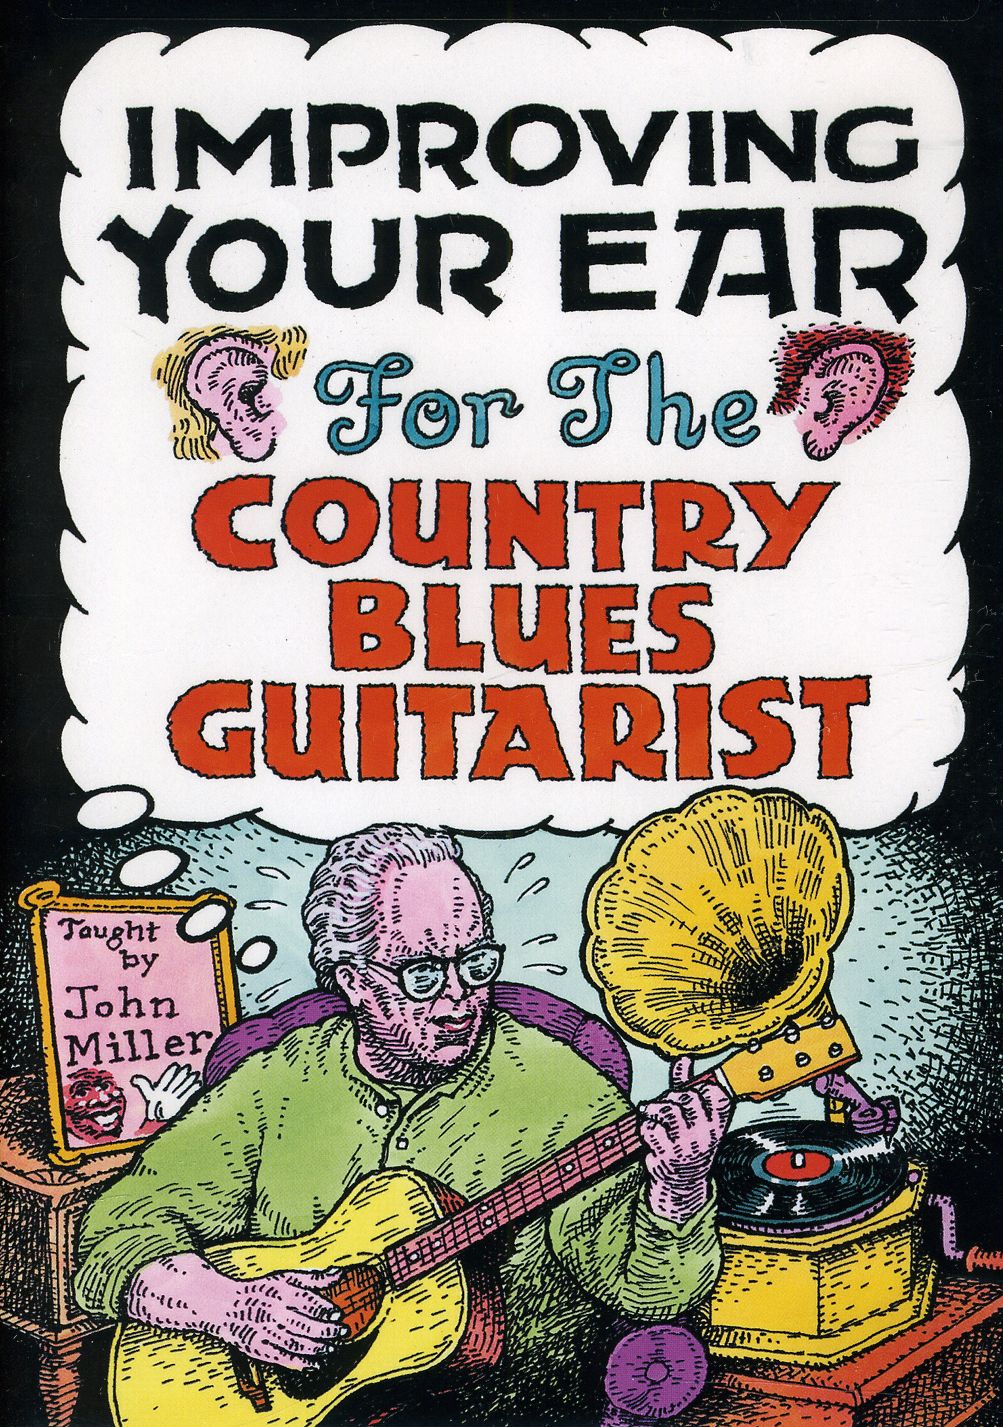 IMPROVING YOUR EAR FOR THE COUNTRY BLUES GUITARIST